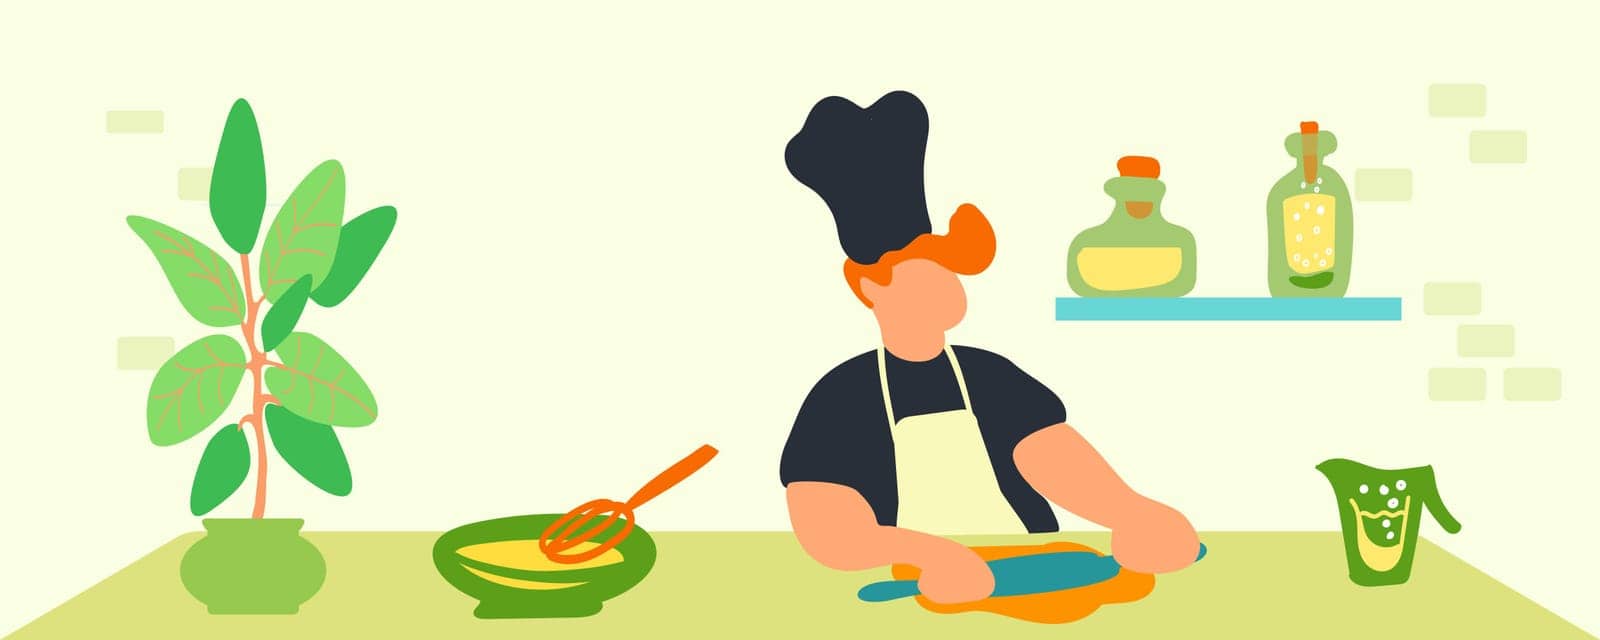 The chef rolls out the dough. Preparing desserts and pastries. Kitchen, green interior. Traditional European American cuisine. Man, cook, spices, dishes, sweets. Healthy eating concept. Vector illustration.